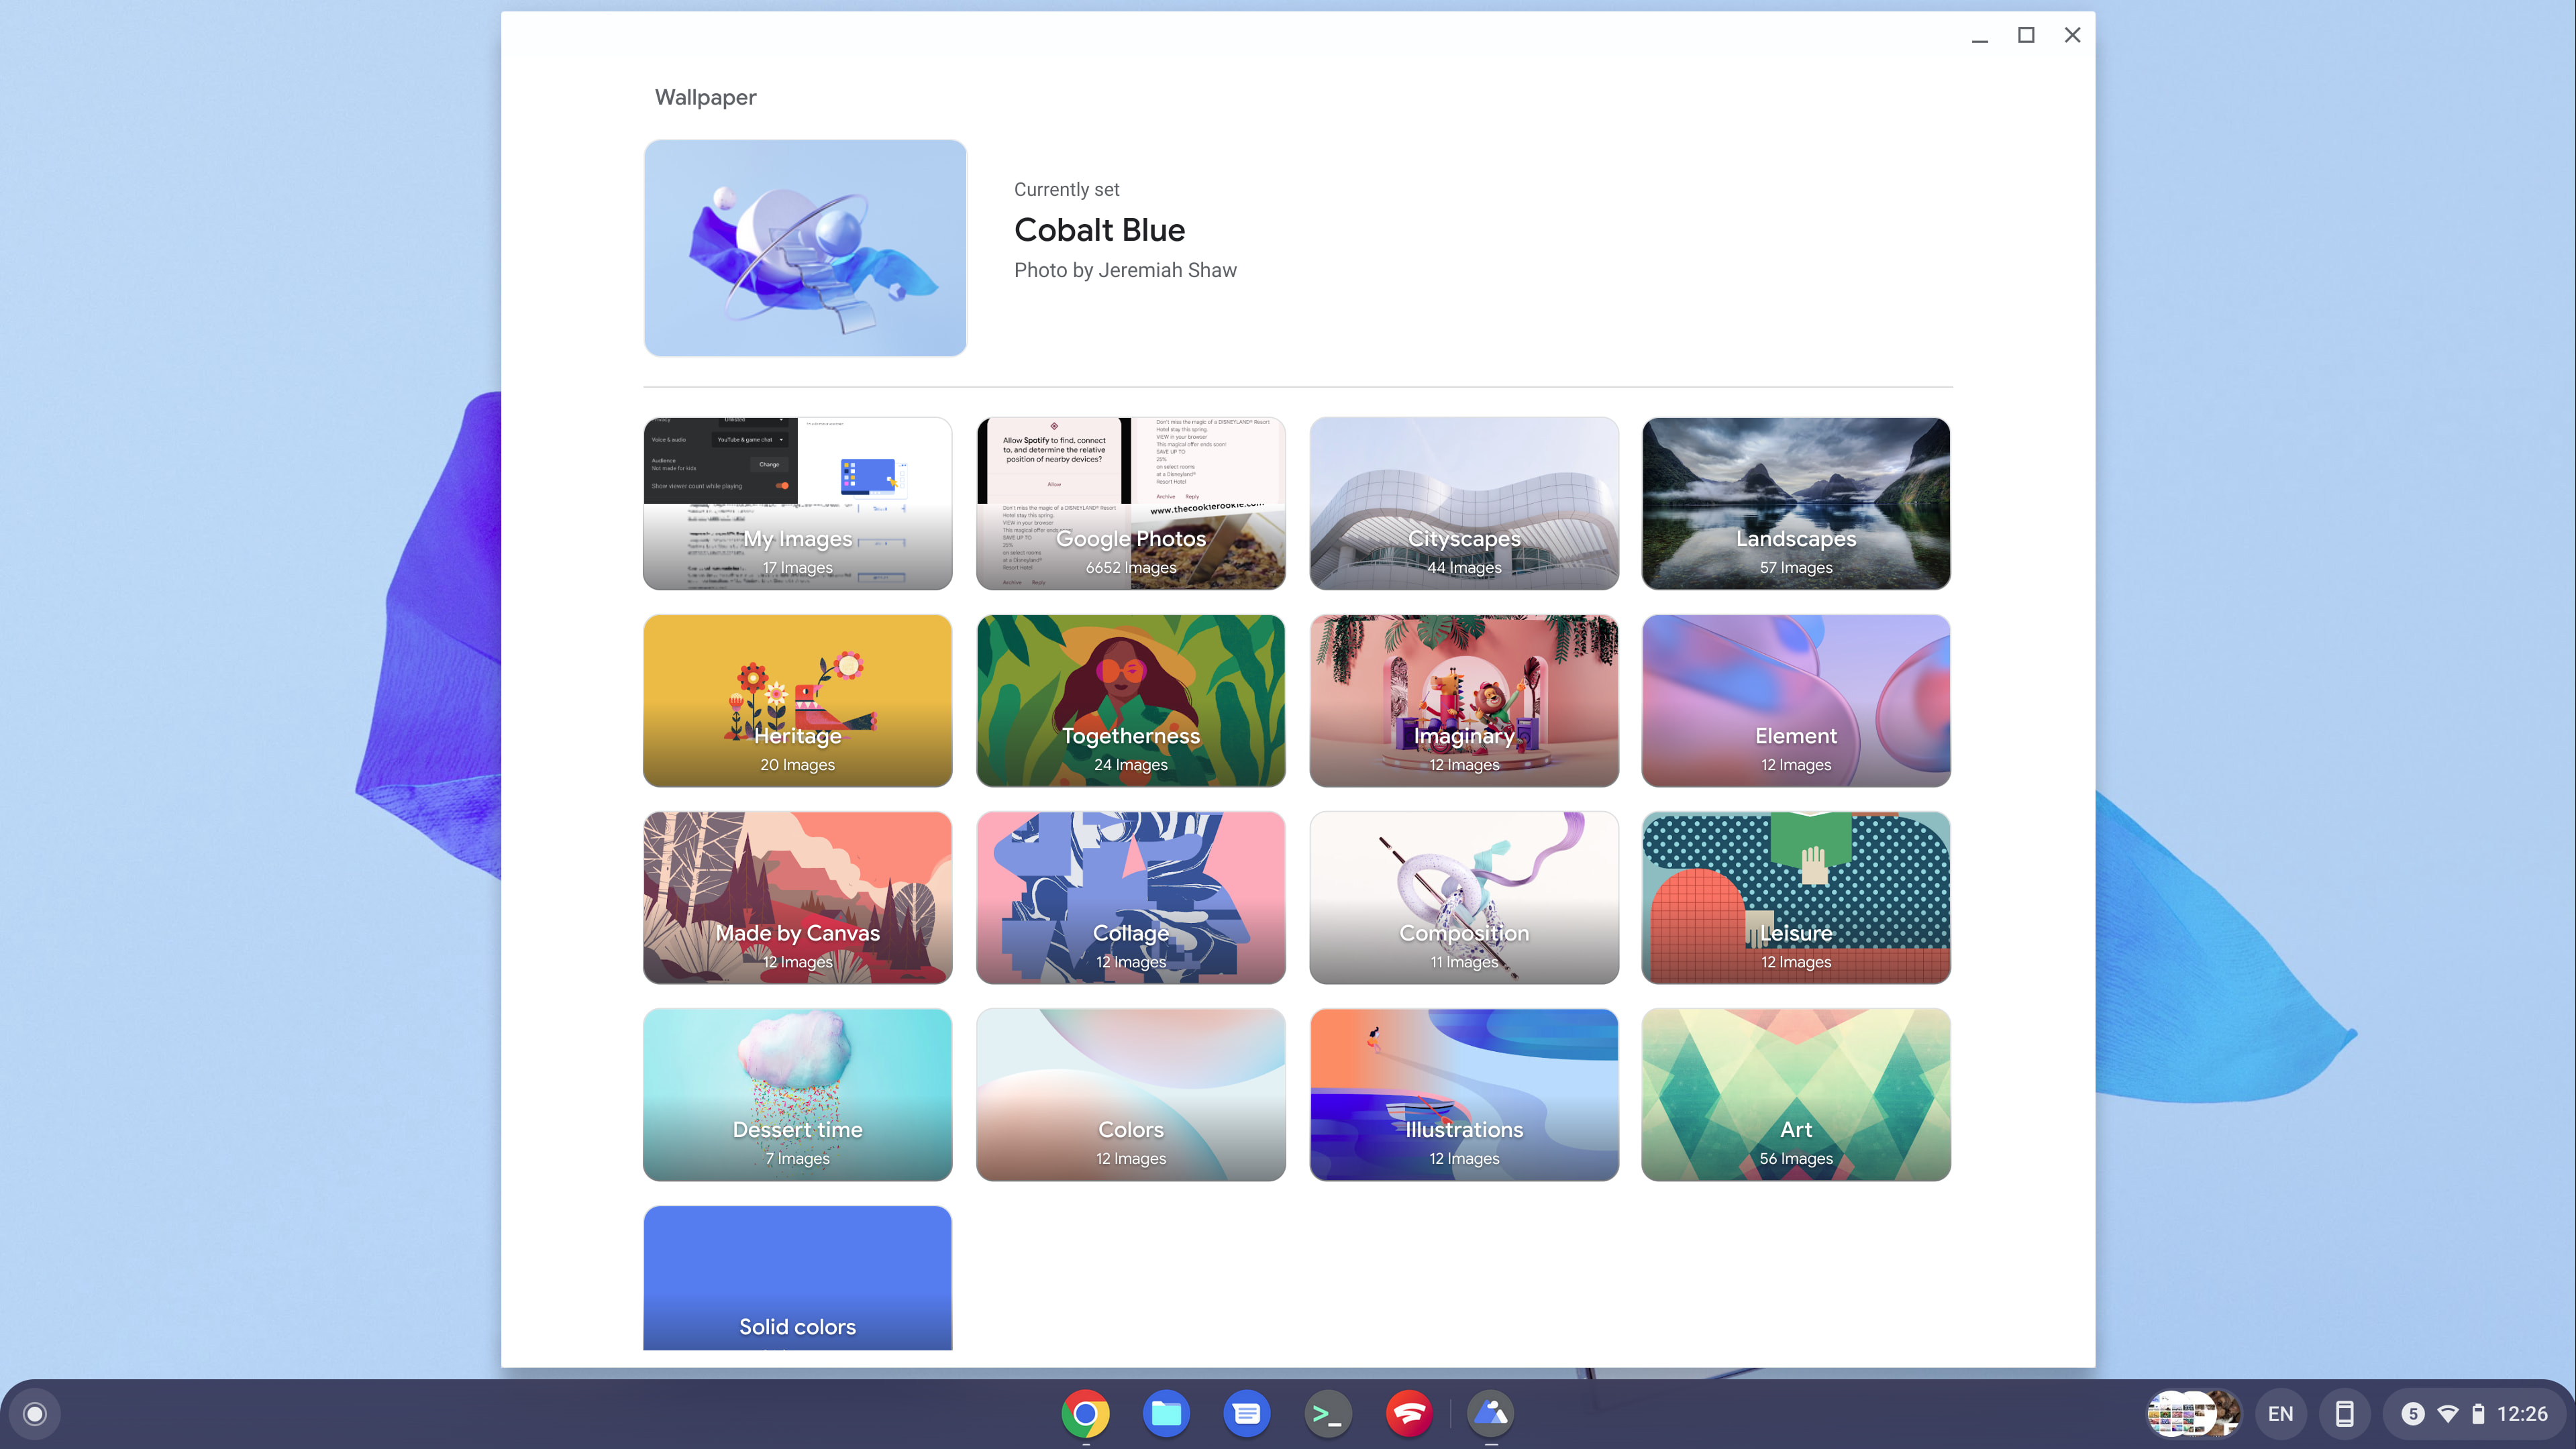 Chrome OS can soon set your wallpaper from Google Photos - 9to5Google